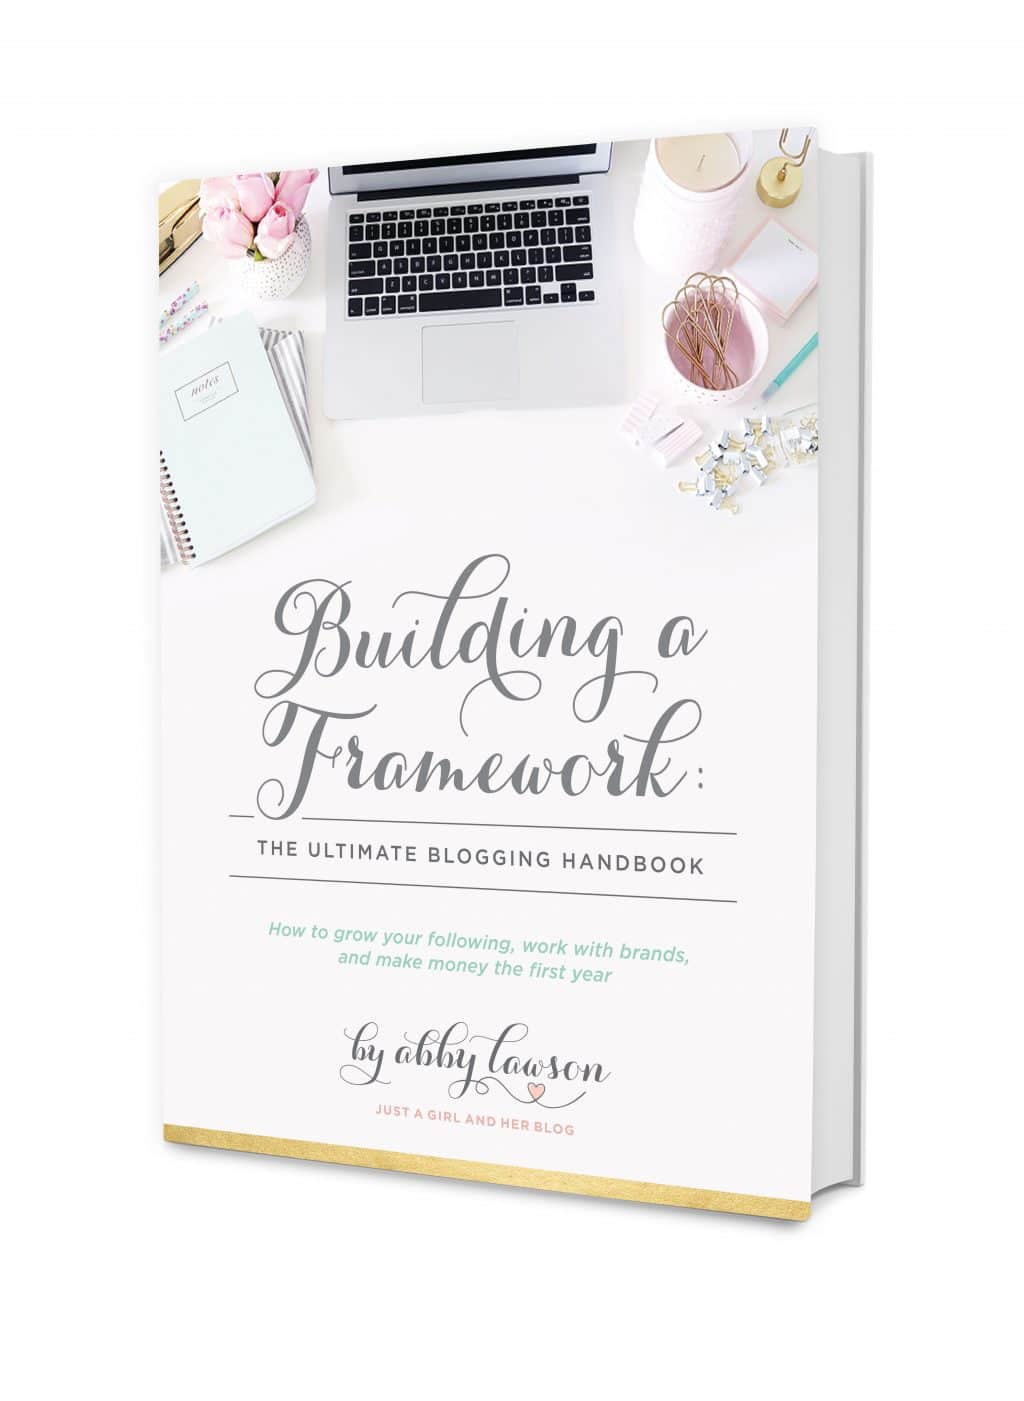 The One Thing All New Bloggers Need to be Successful!